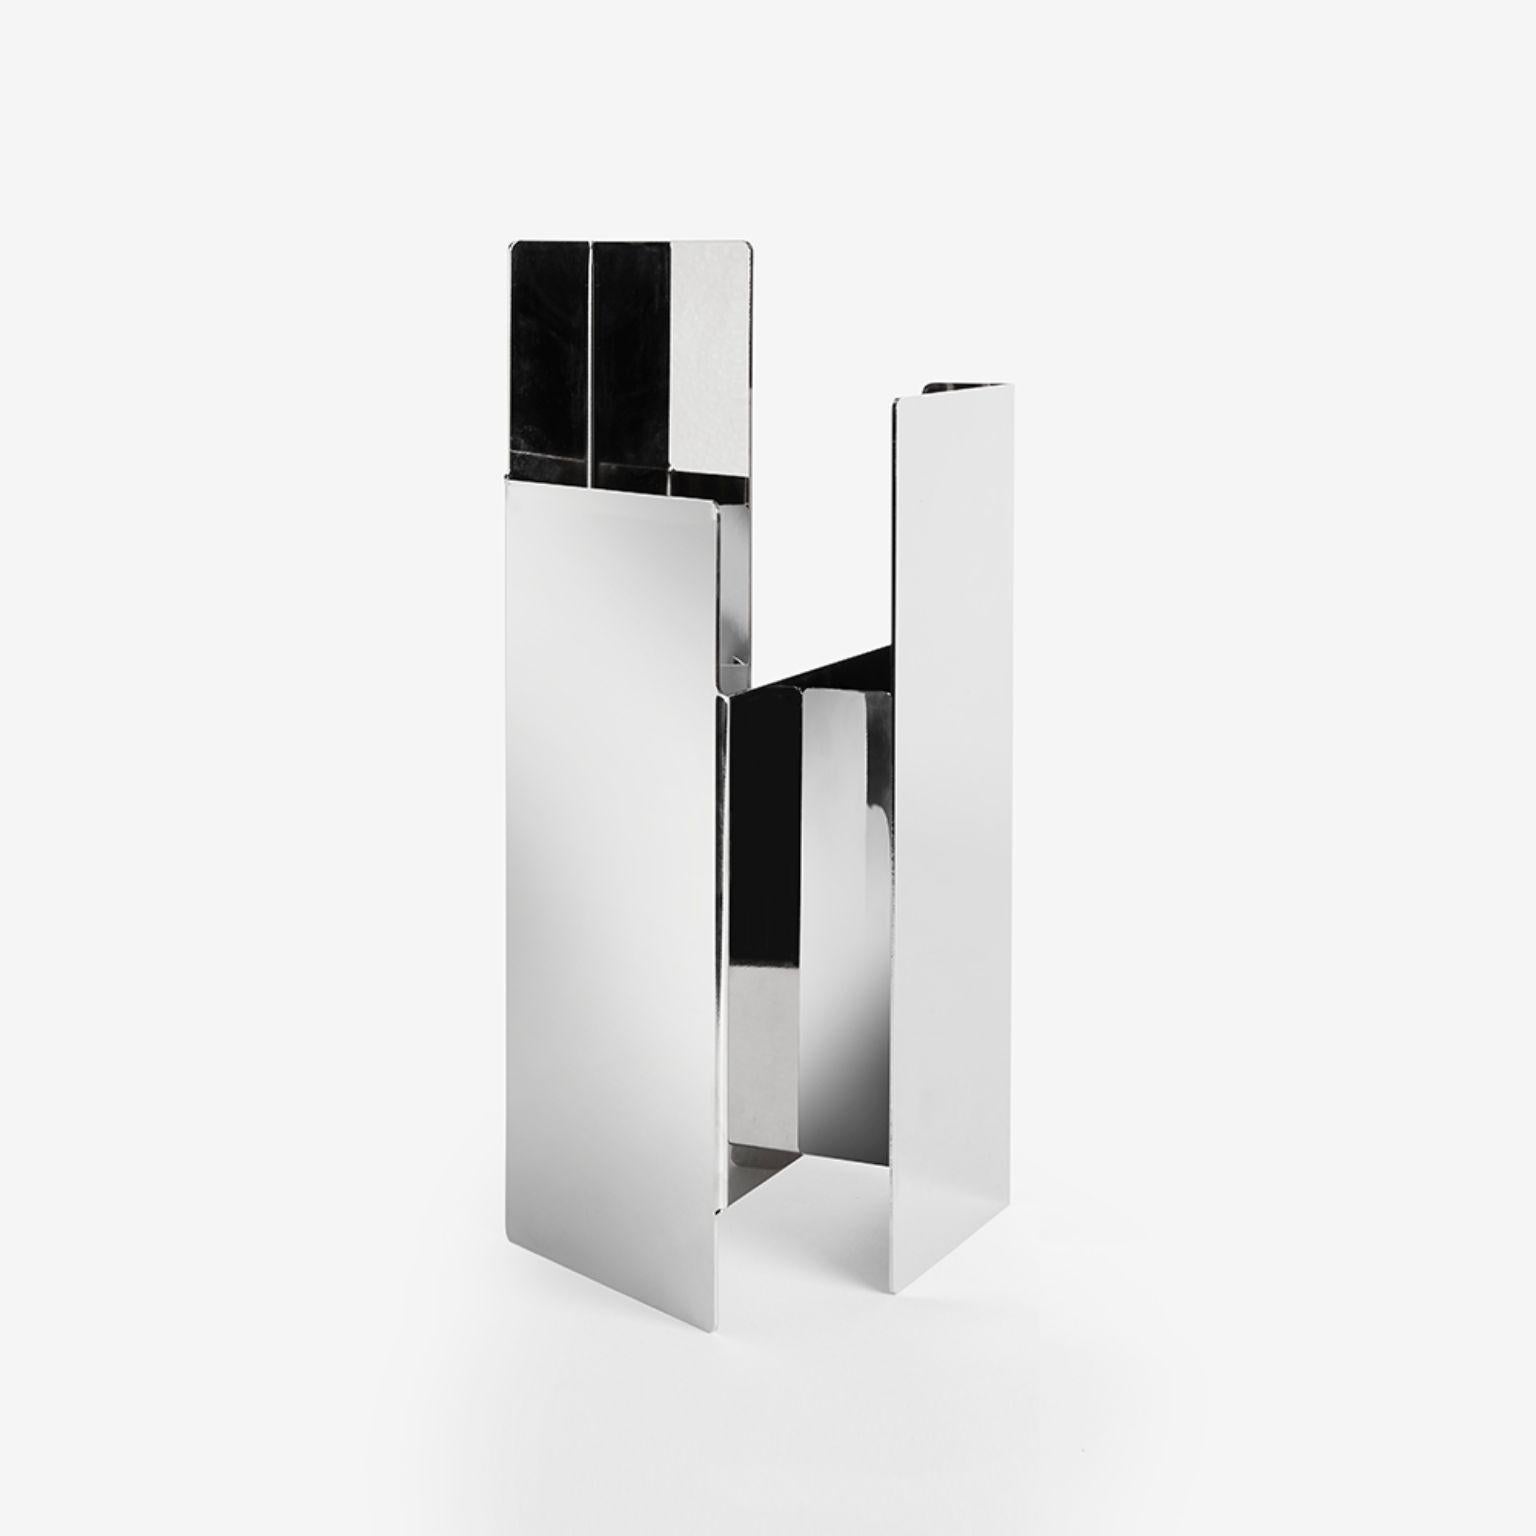 Polished white nickel fugit vase by Mason Editions
Design: Matteo Fiorini
Dimensions: 12 × 15 × 34 cm
Materials: Iron, pirex glass

Fugit vase consists of a metal sheet that seems to turn and close around itself, generating an alternation of